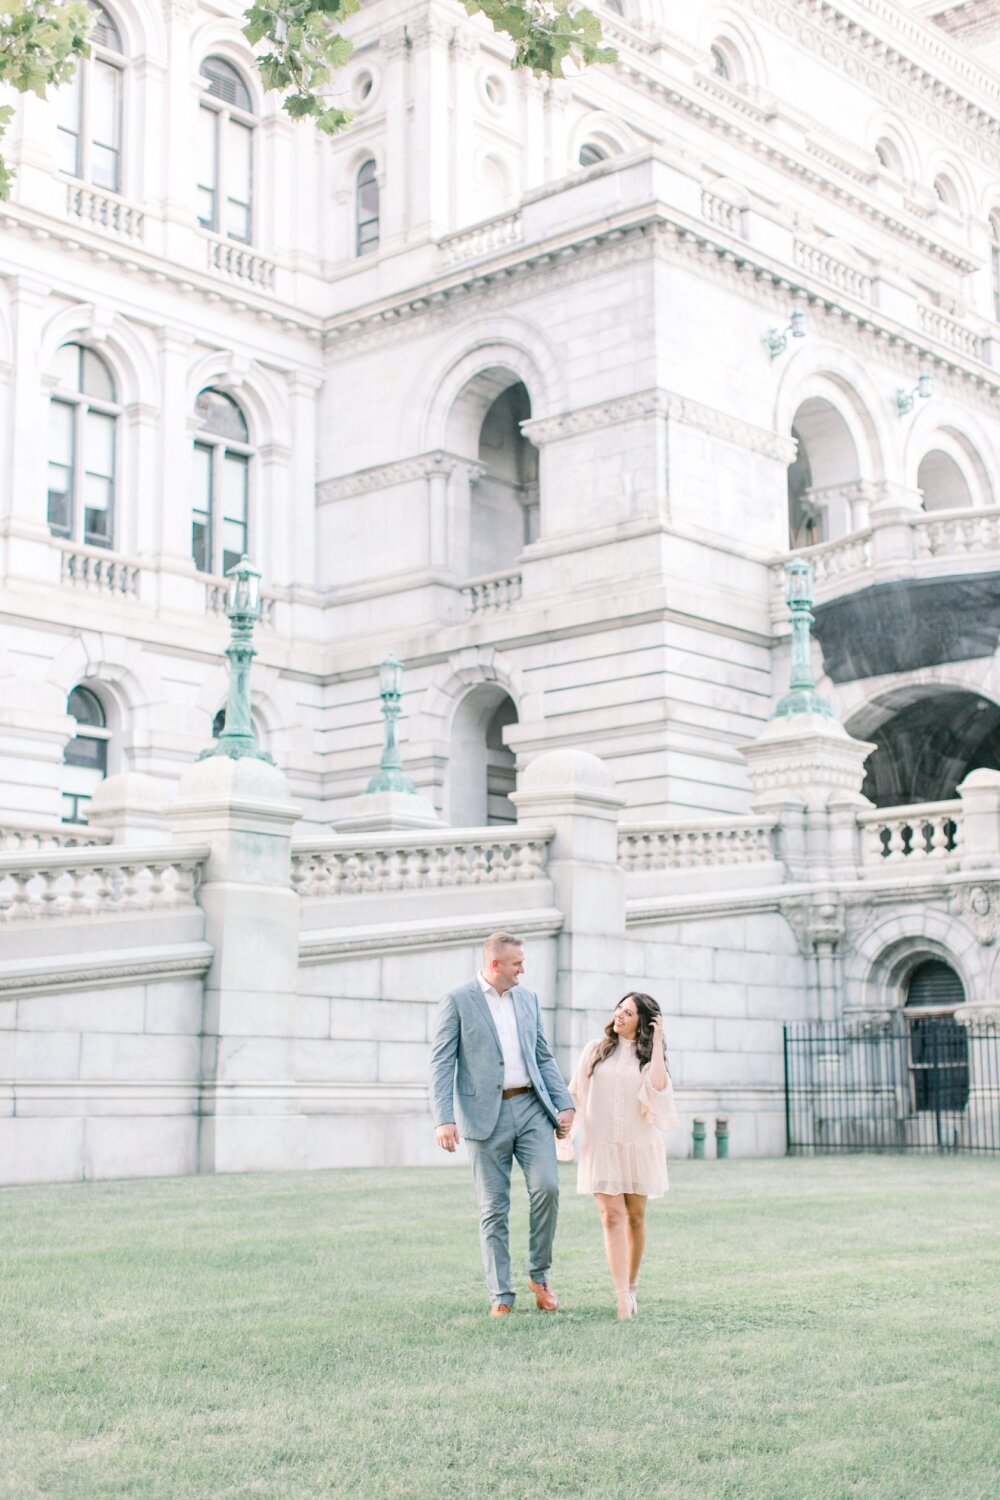 Downtown-Albany-New-York-Engagement-Session_Cassi-Claire_04.jpg